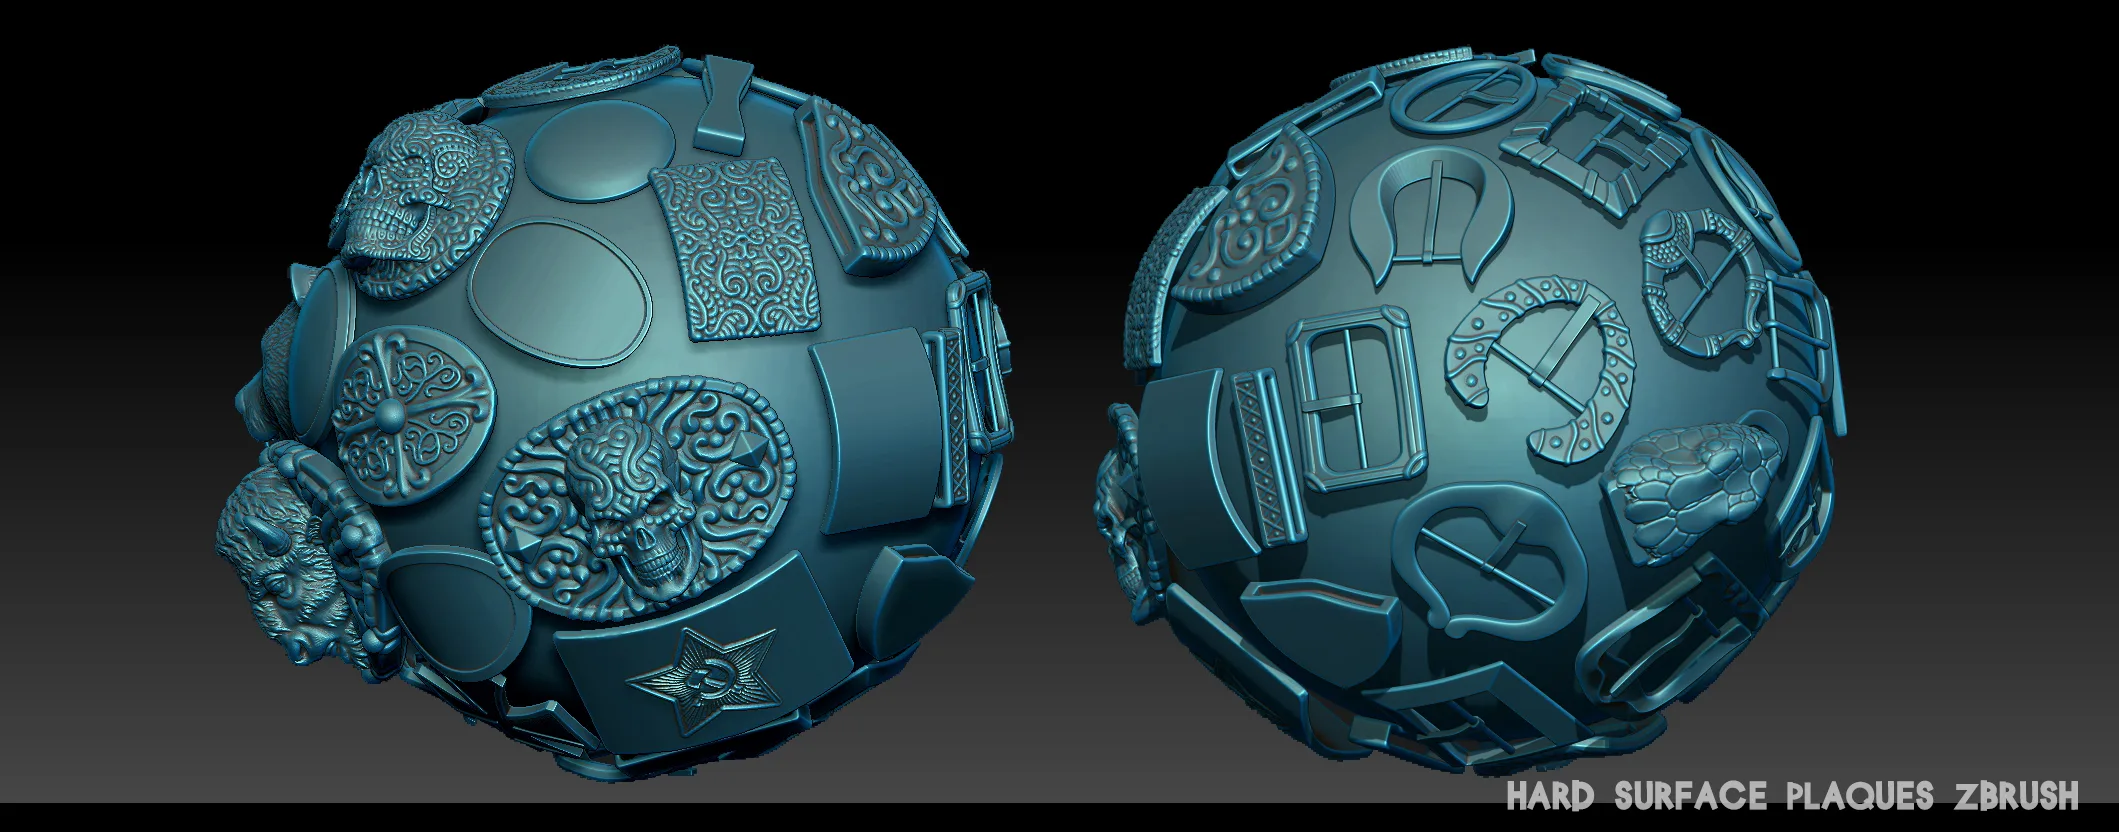 Hard Surface plaques Zbrush